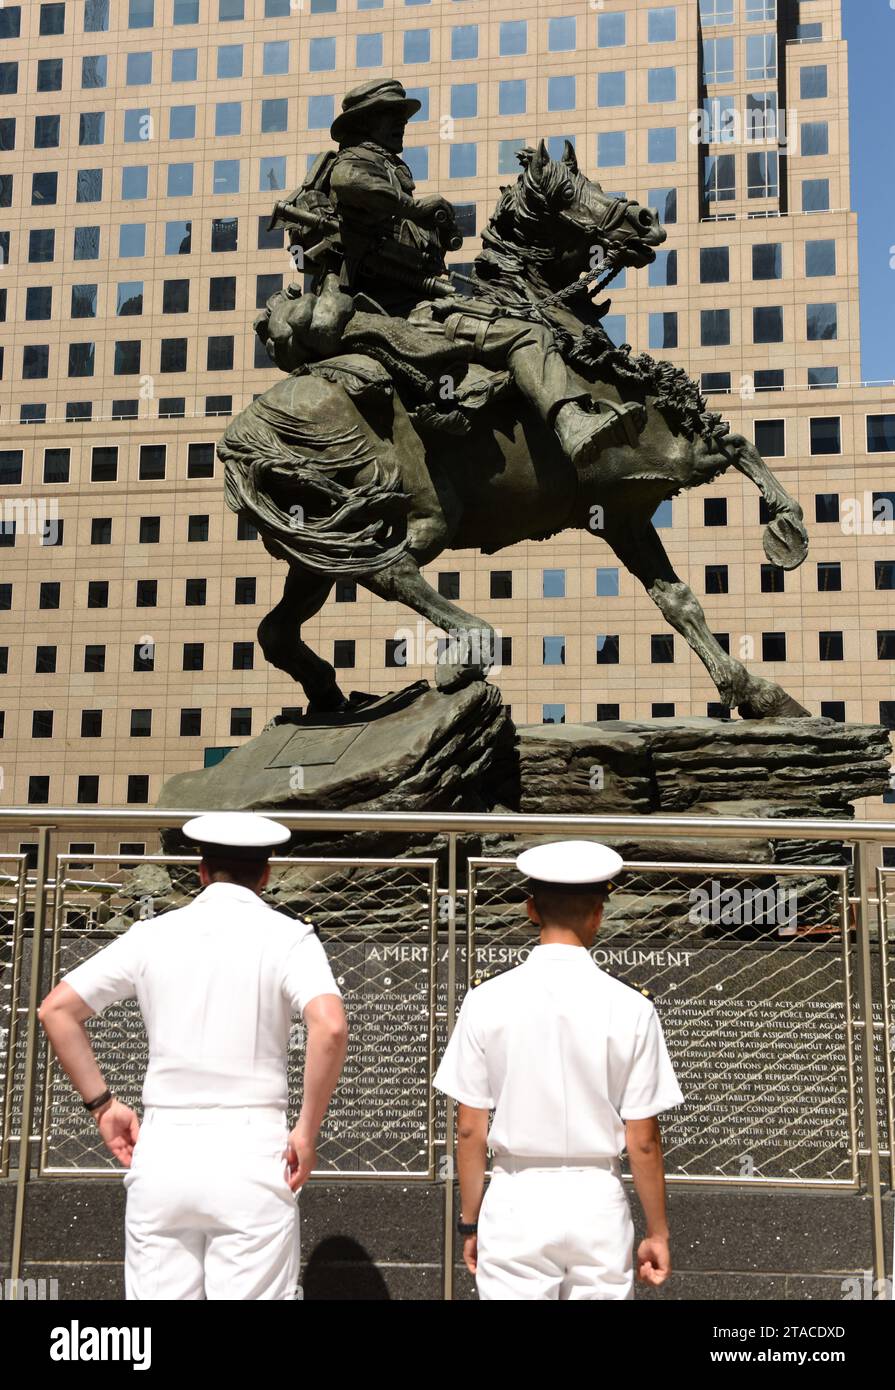 New York, USA - May 24, 2018: US Navy sailors during visiting the America's Response Monument in Liberty Park near NYC 9/11 Memorial in New York. Stock Photo